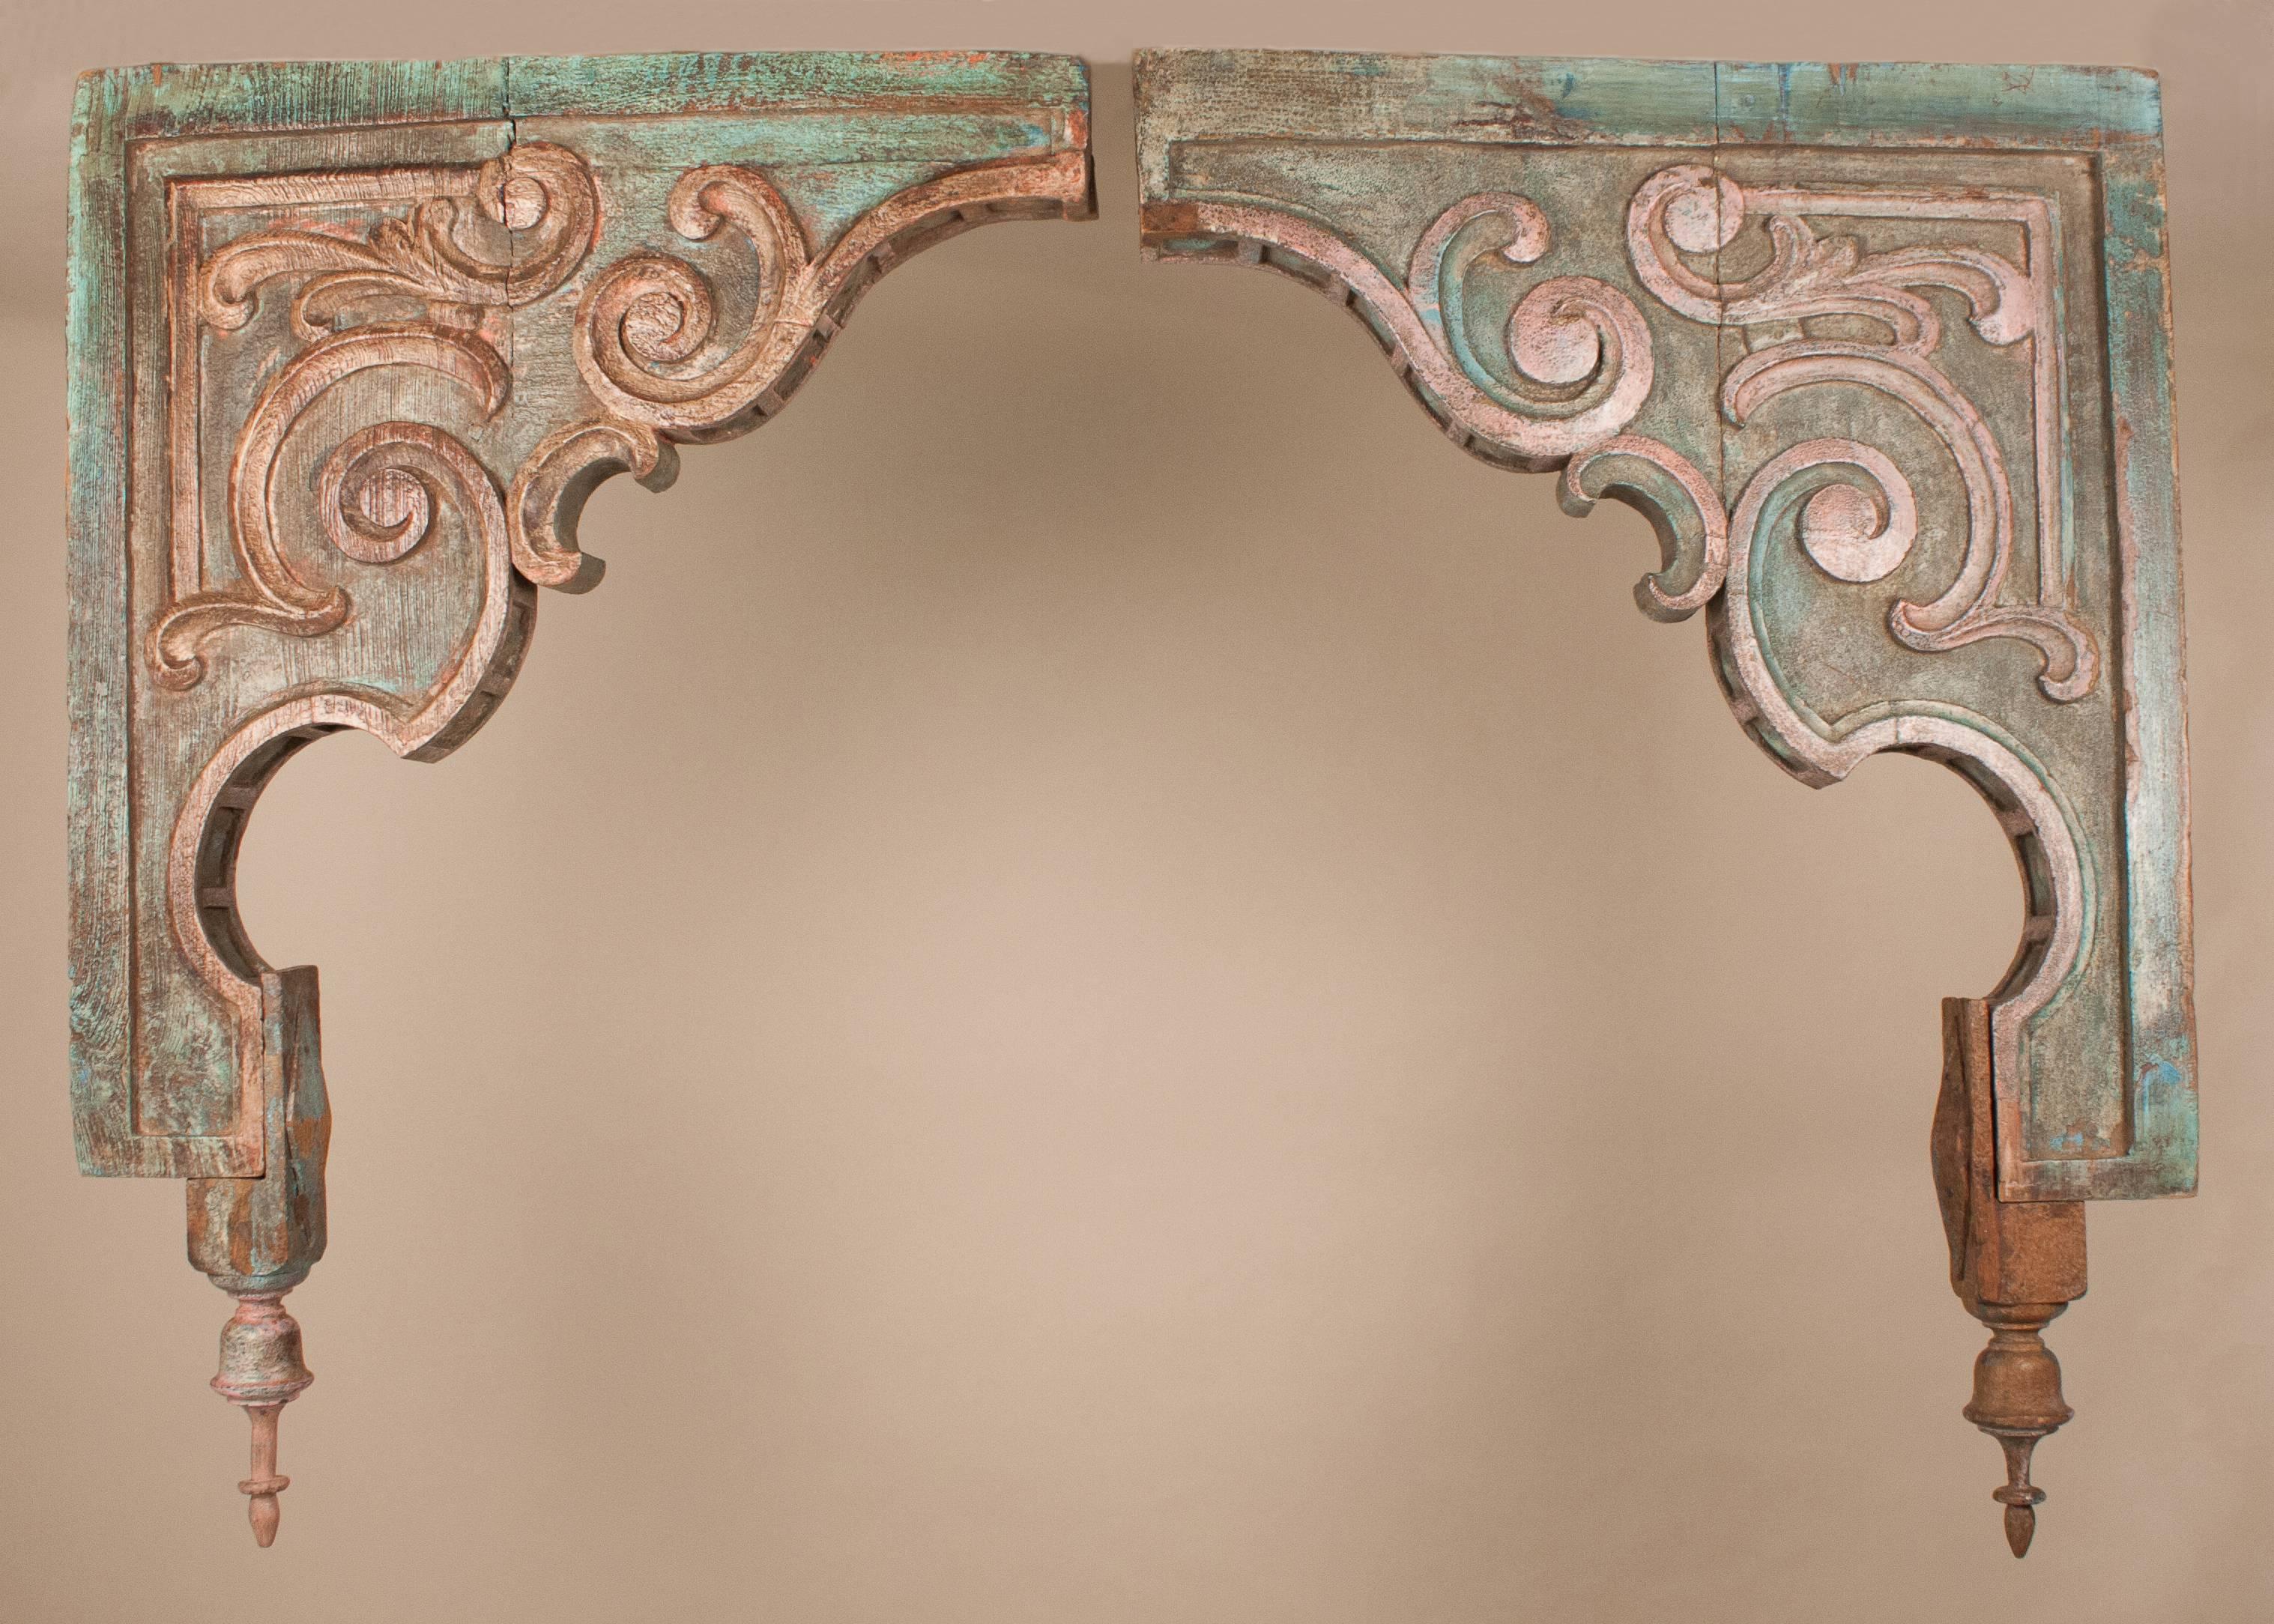 Pair of large teak wood corbels from a Gujarati haveli in India. These colorful architectural treasures have a distinctly rustic appeal, including their original paint and subtle variations in the hand carving of each of the corbels, circa 1930.